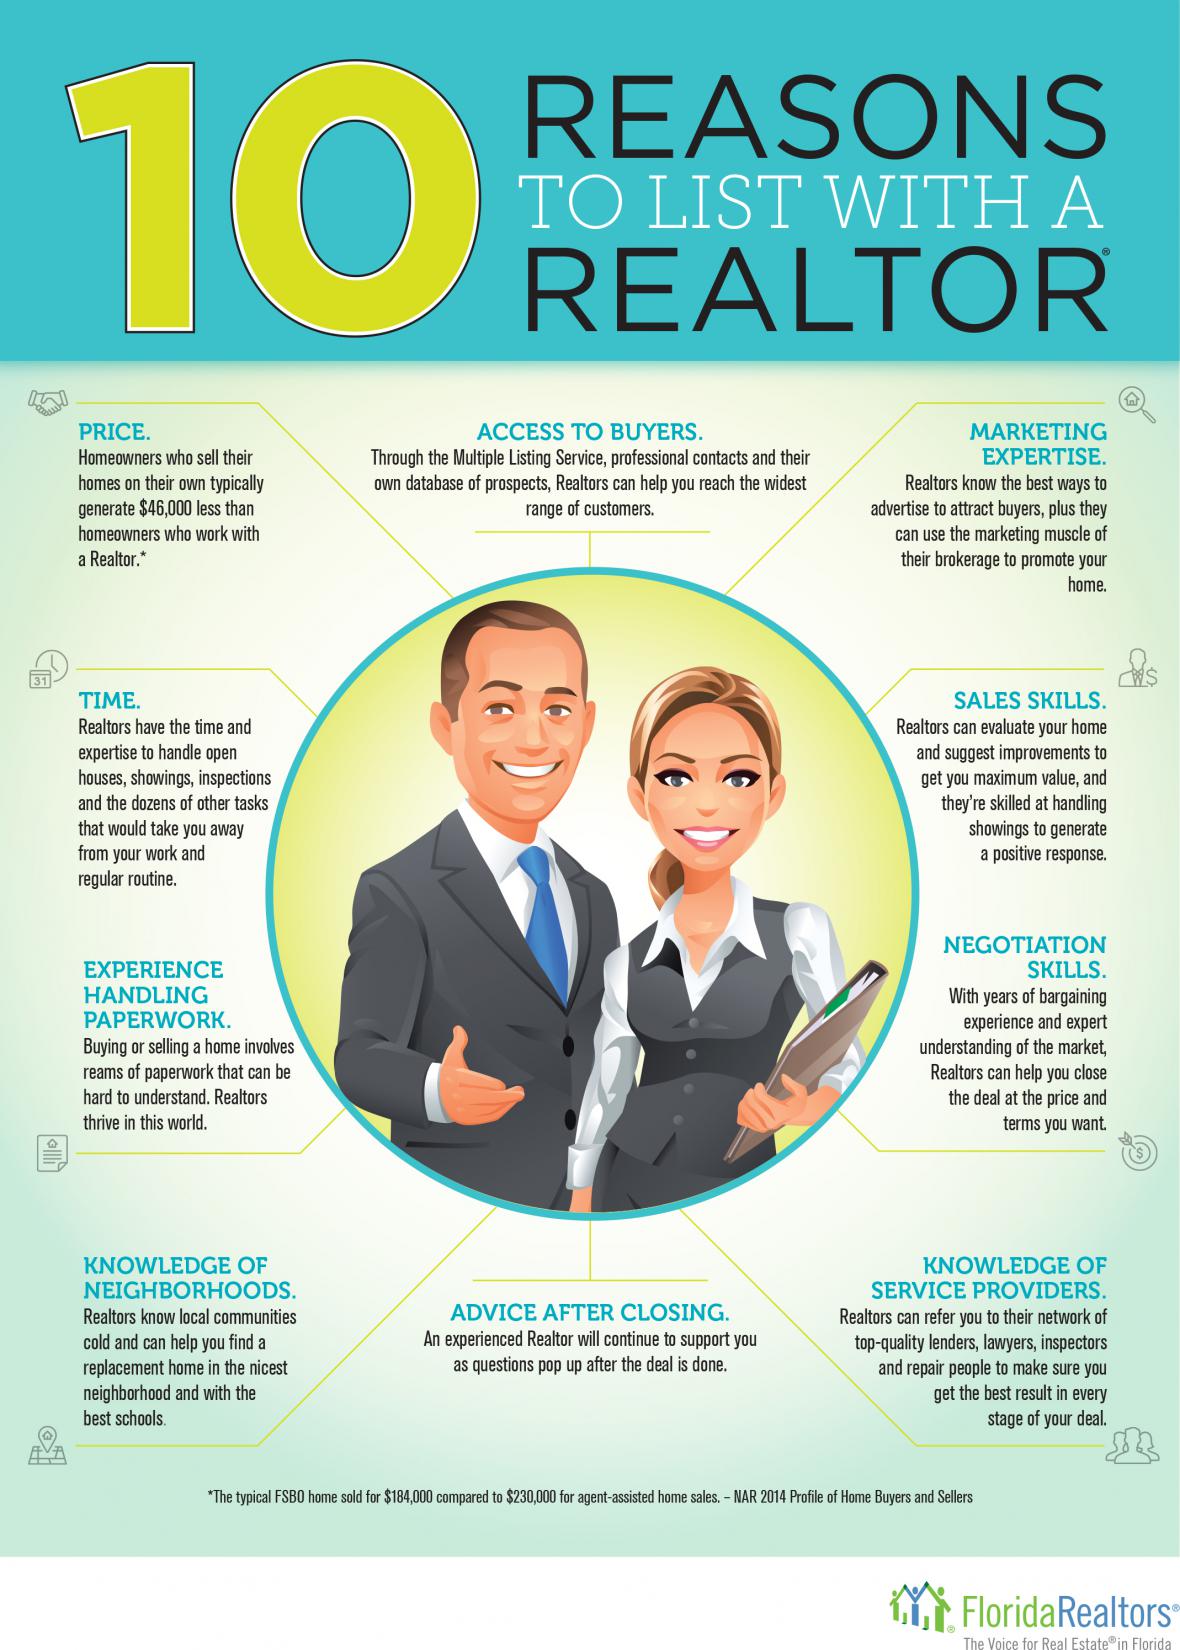 10 Reasons to List with a Realtor